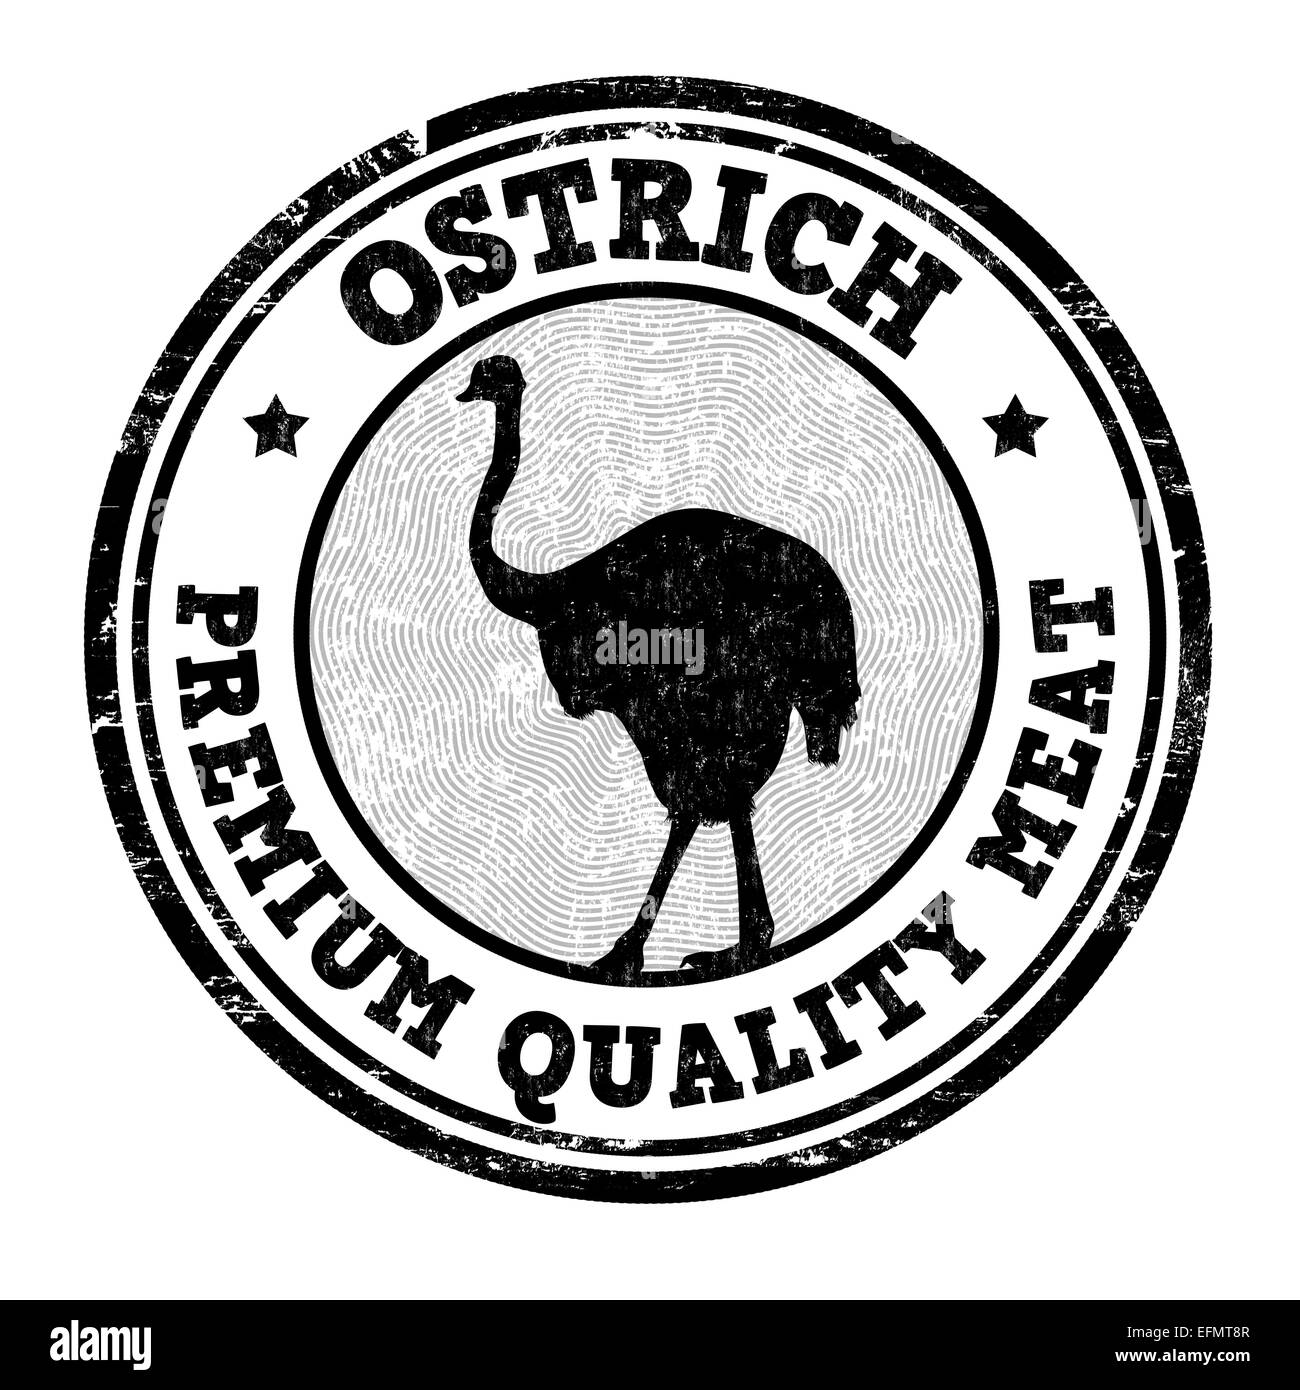 Ostrich grunge rubber stamp on white background, vector illustration Stock Photo